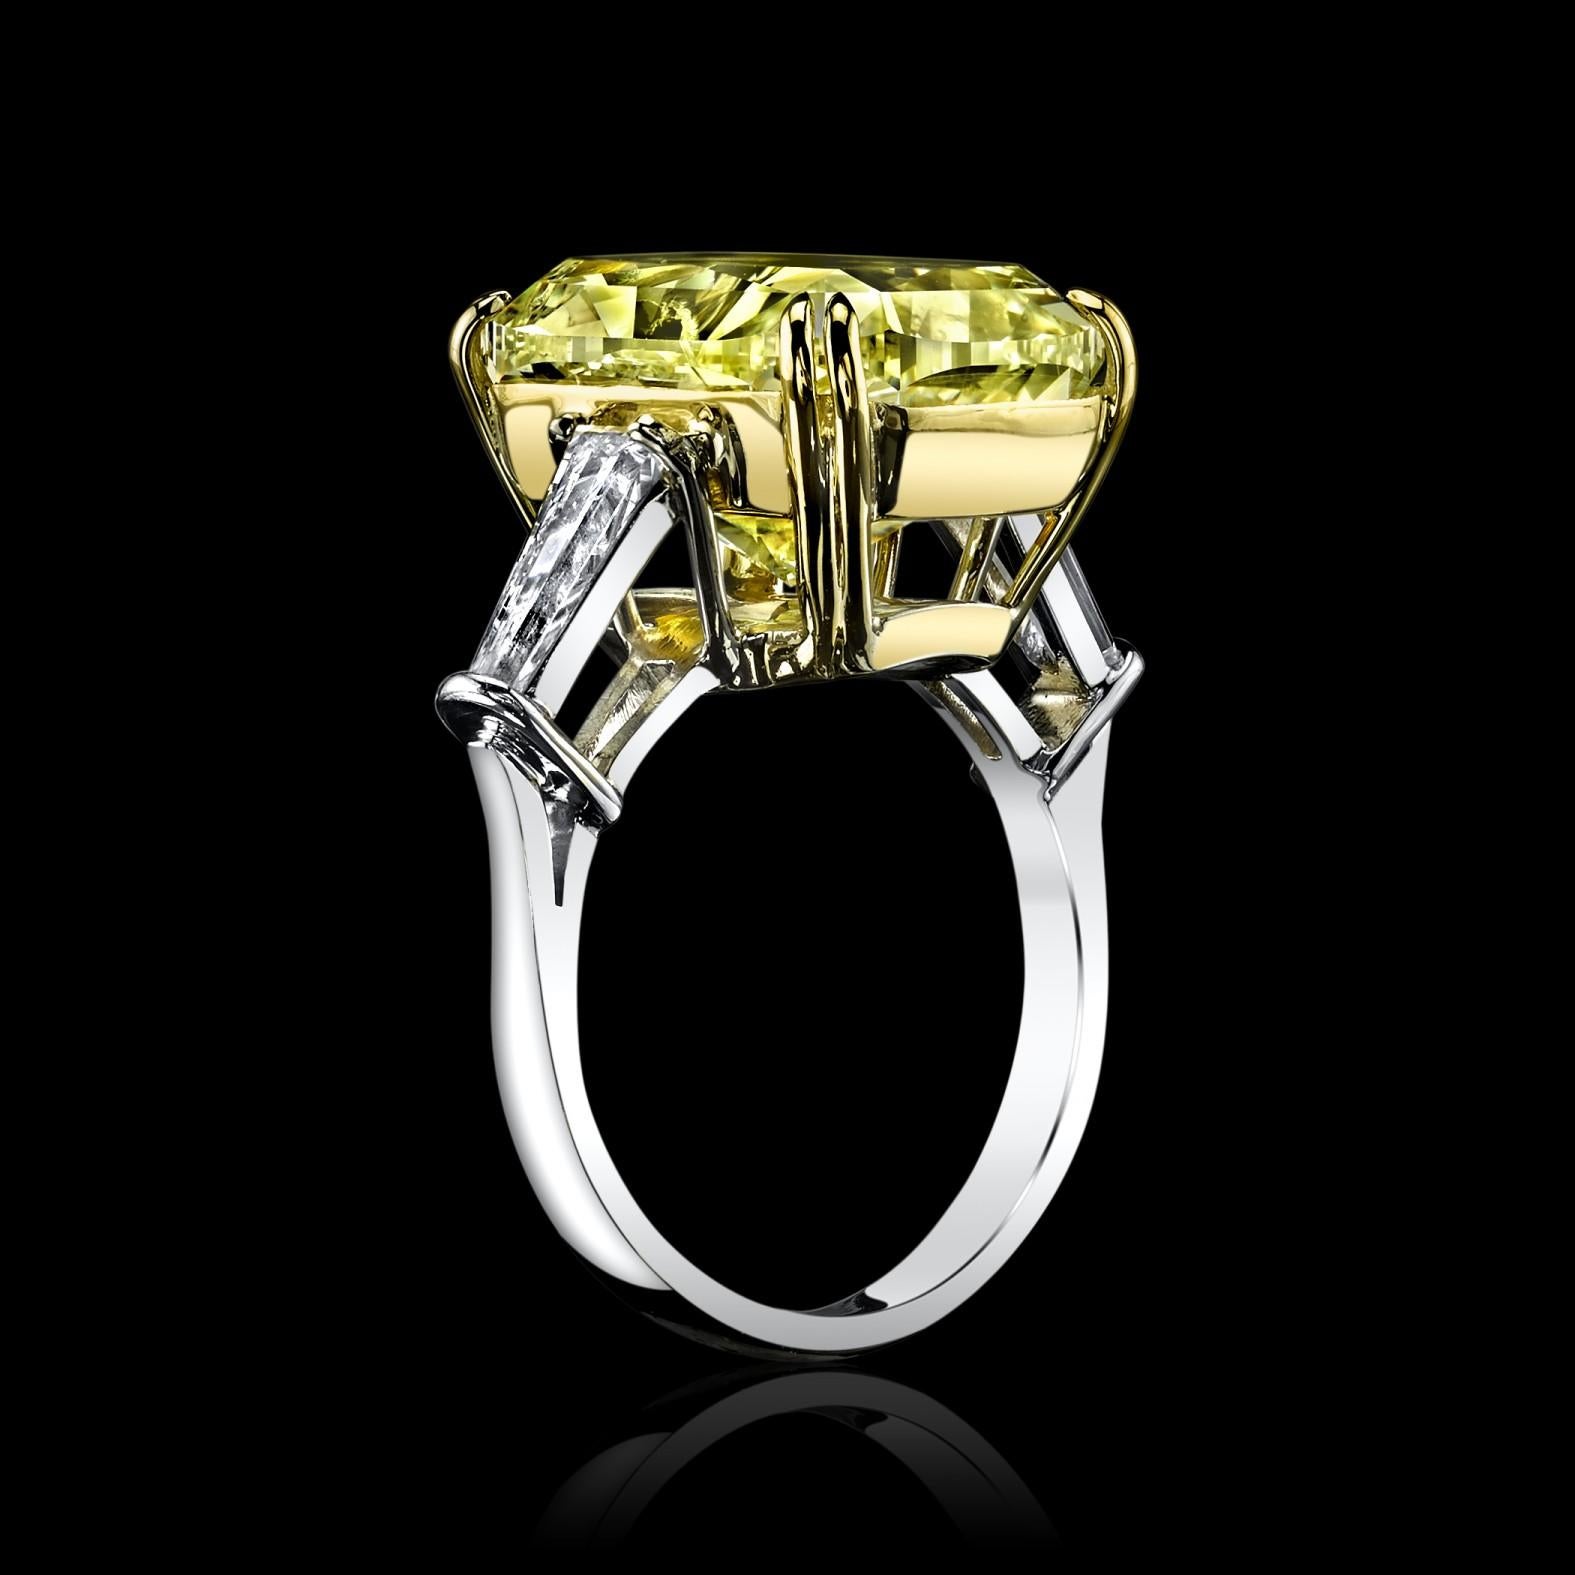 GIA Certified 17.49 Carat Cushion Cut Fancy Light Yellow Diamond Ring In New Condition For Sale In Calabasas, CA